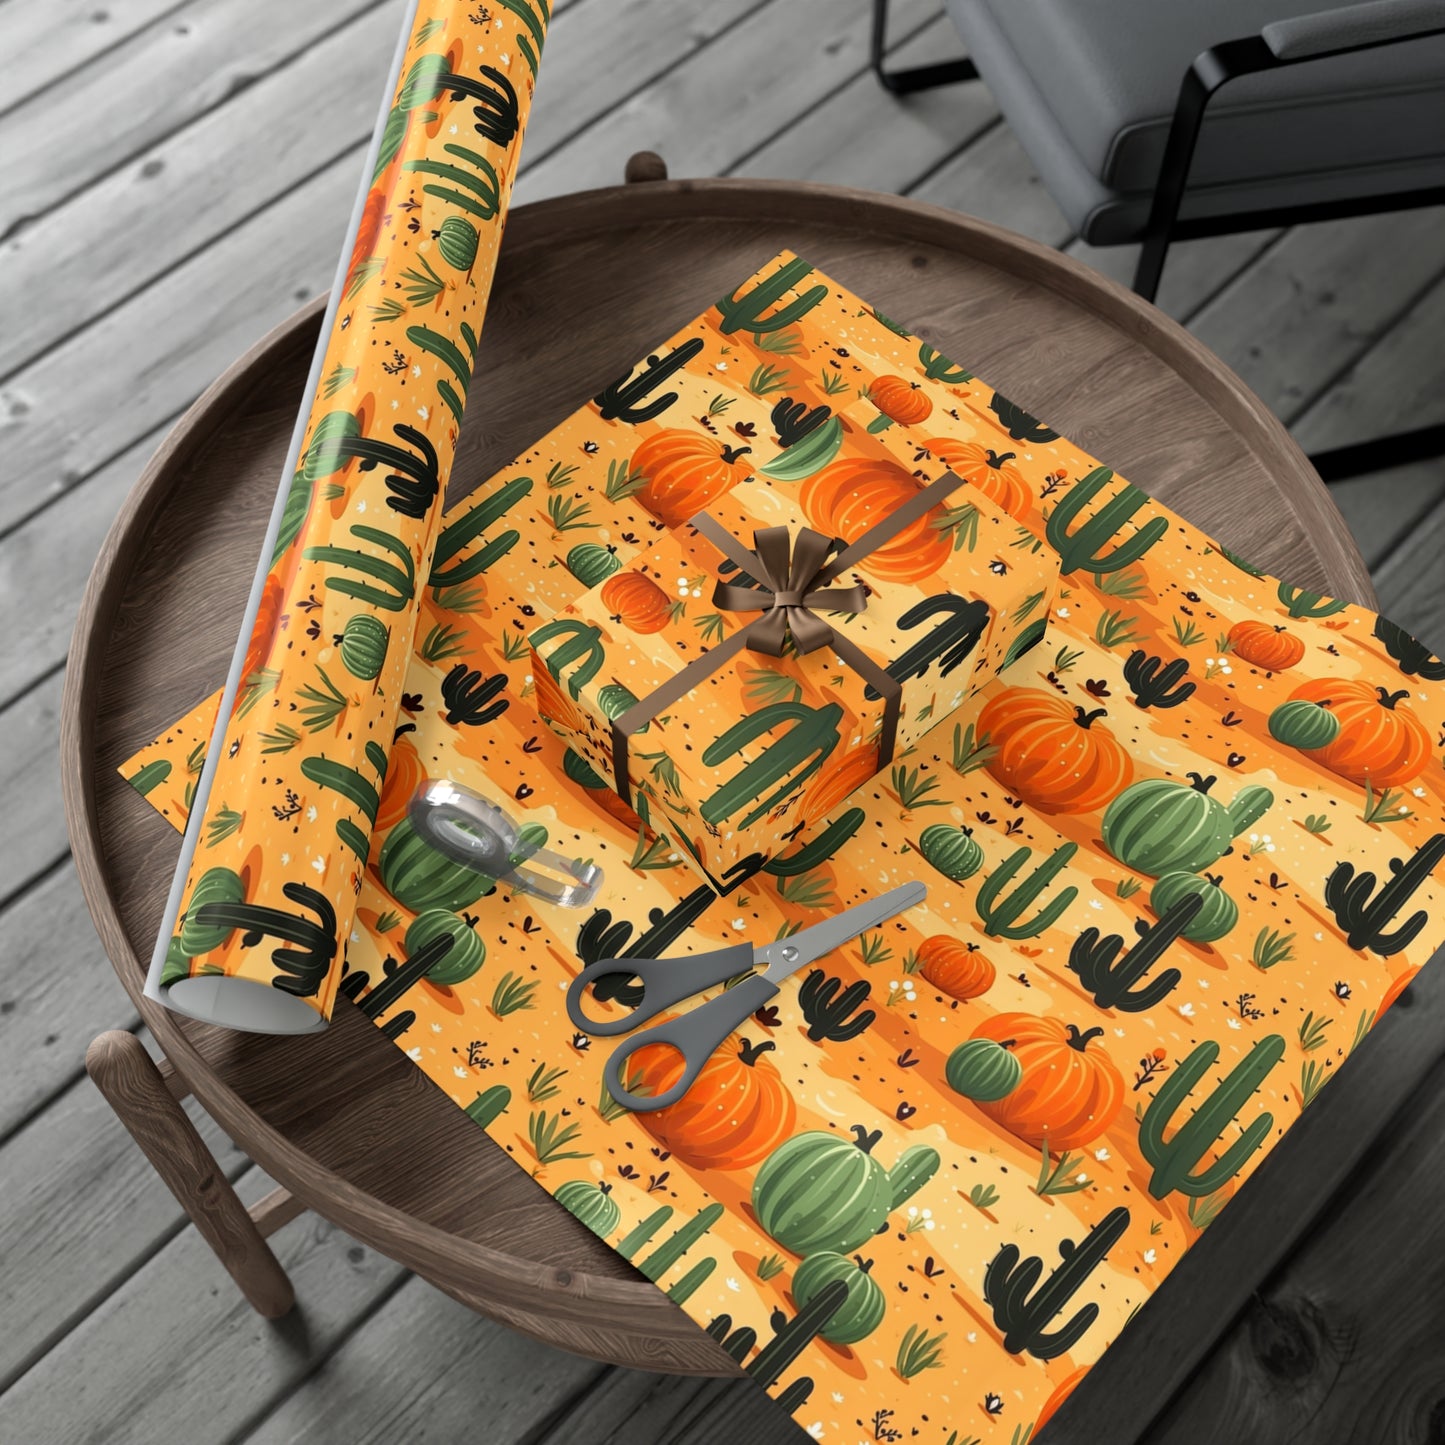 Western Wrapping Paper Roll Cactus Gift Wrap 6 Foot Roll Gift Wrapping Paper Halloween Pumpkin Wrapping Paper